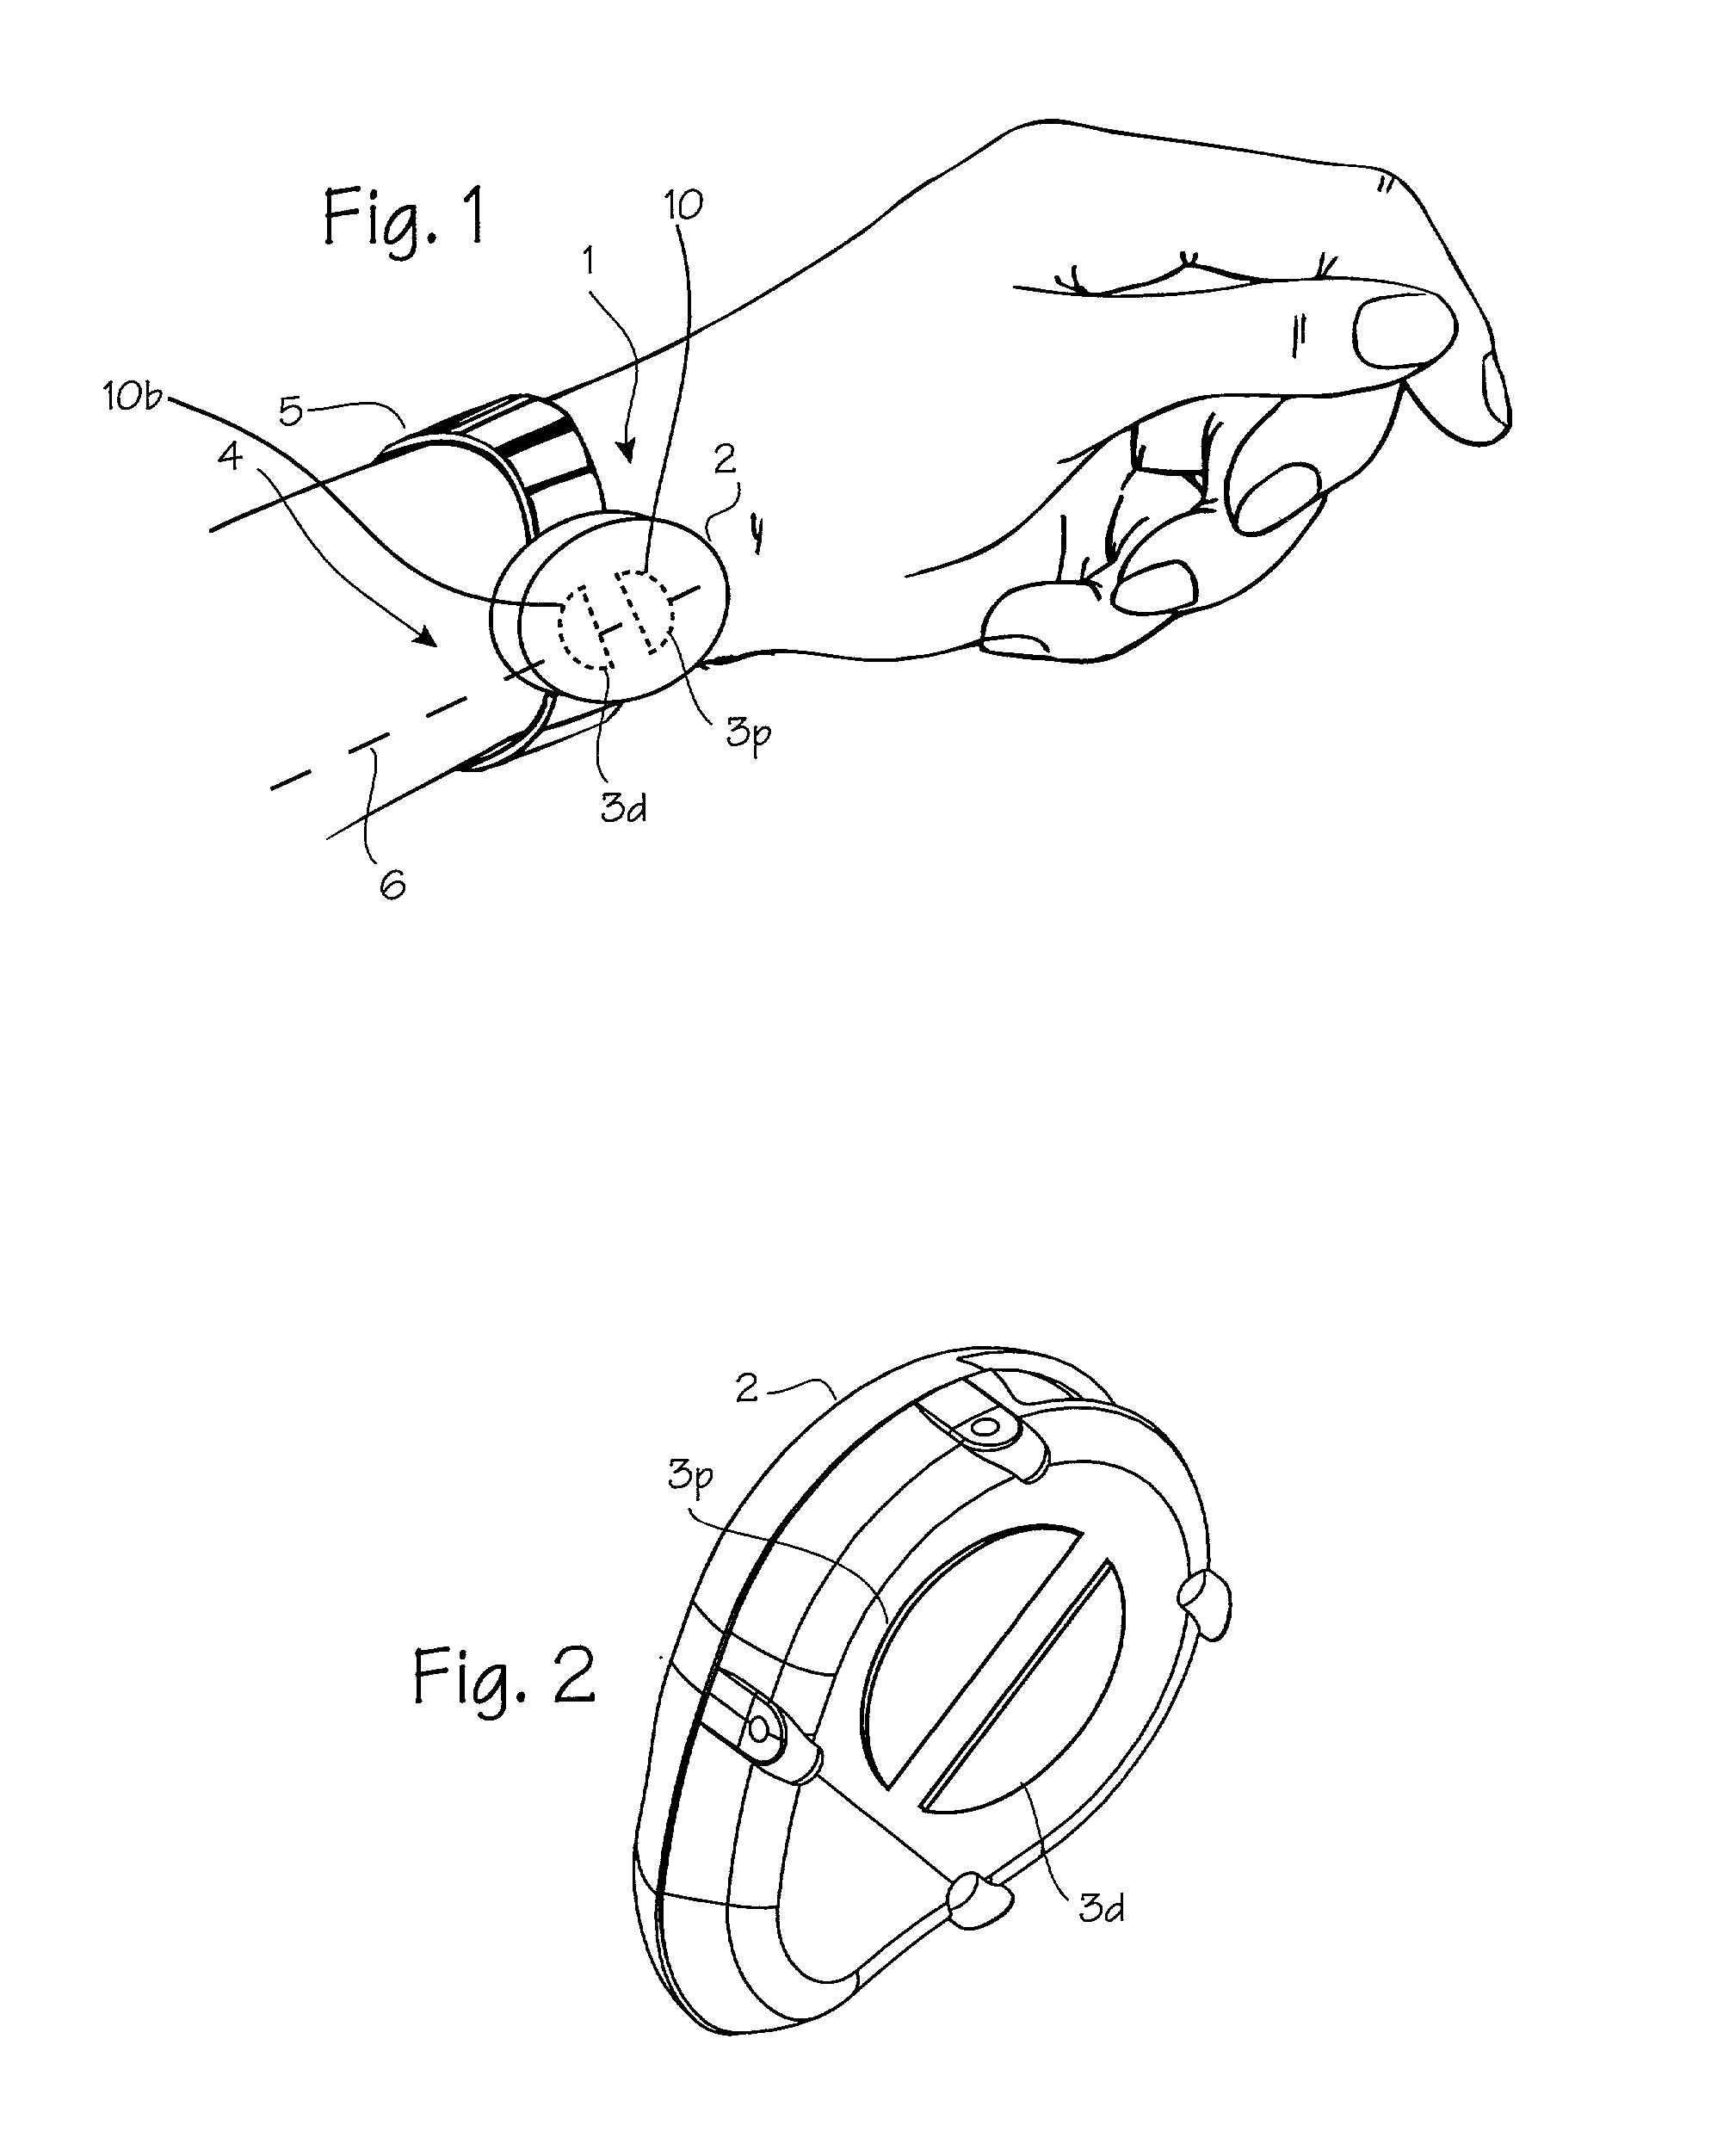 Electro-acupuncture device with D-shaped stimulation electrodes